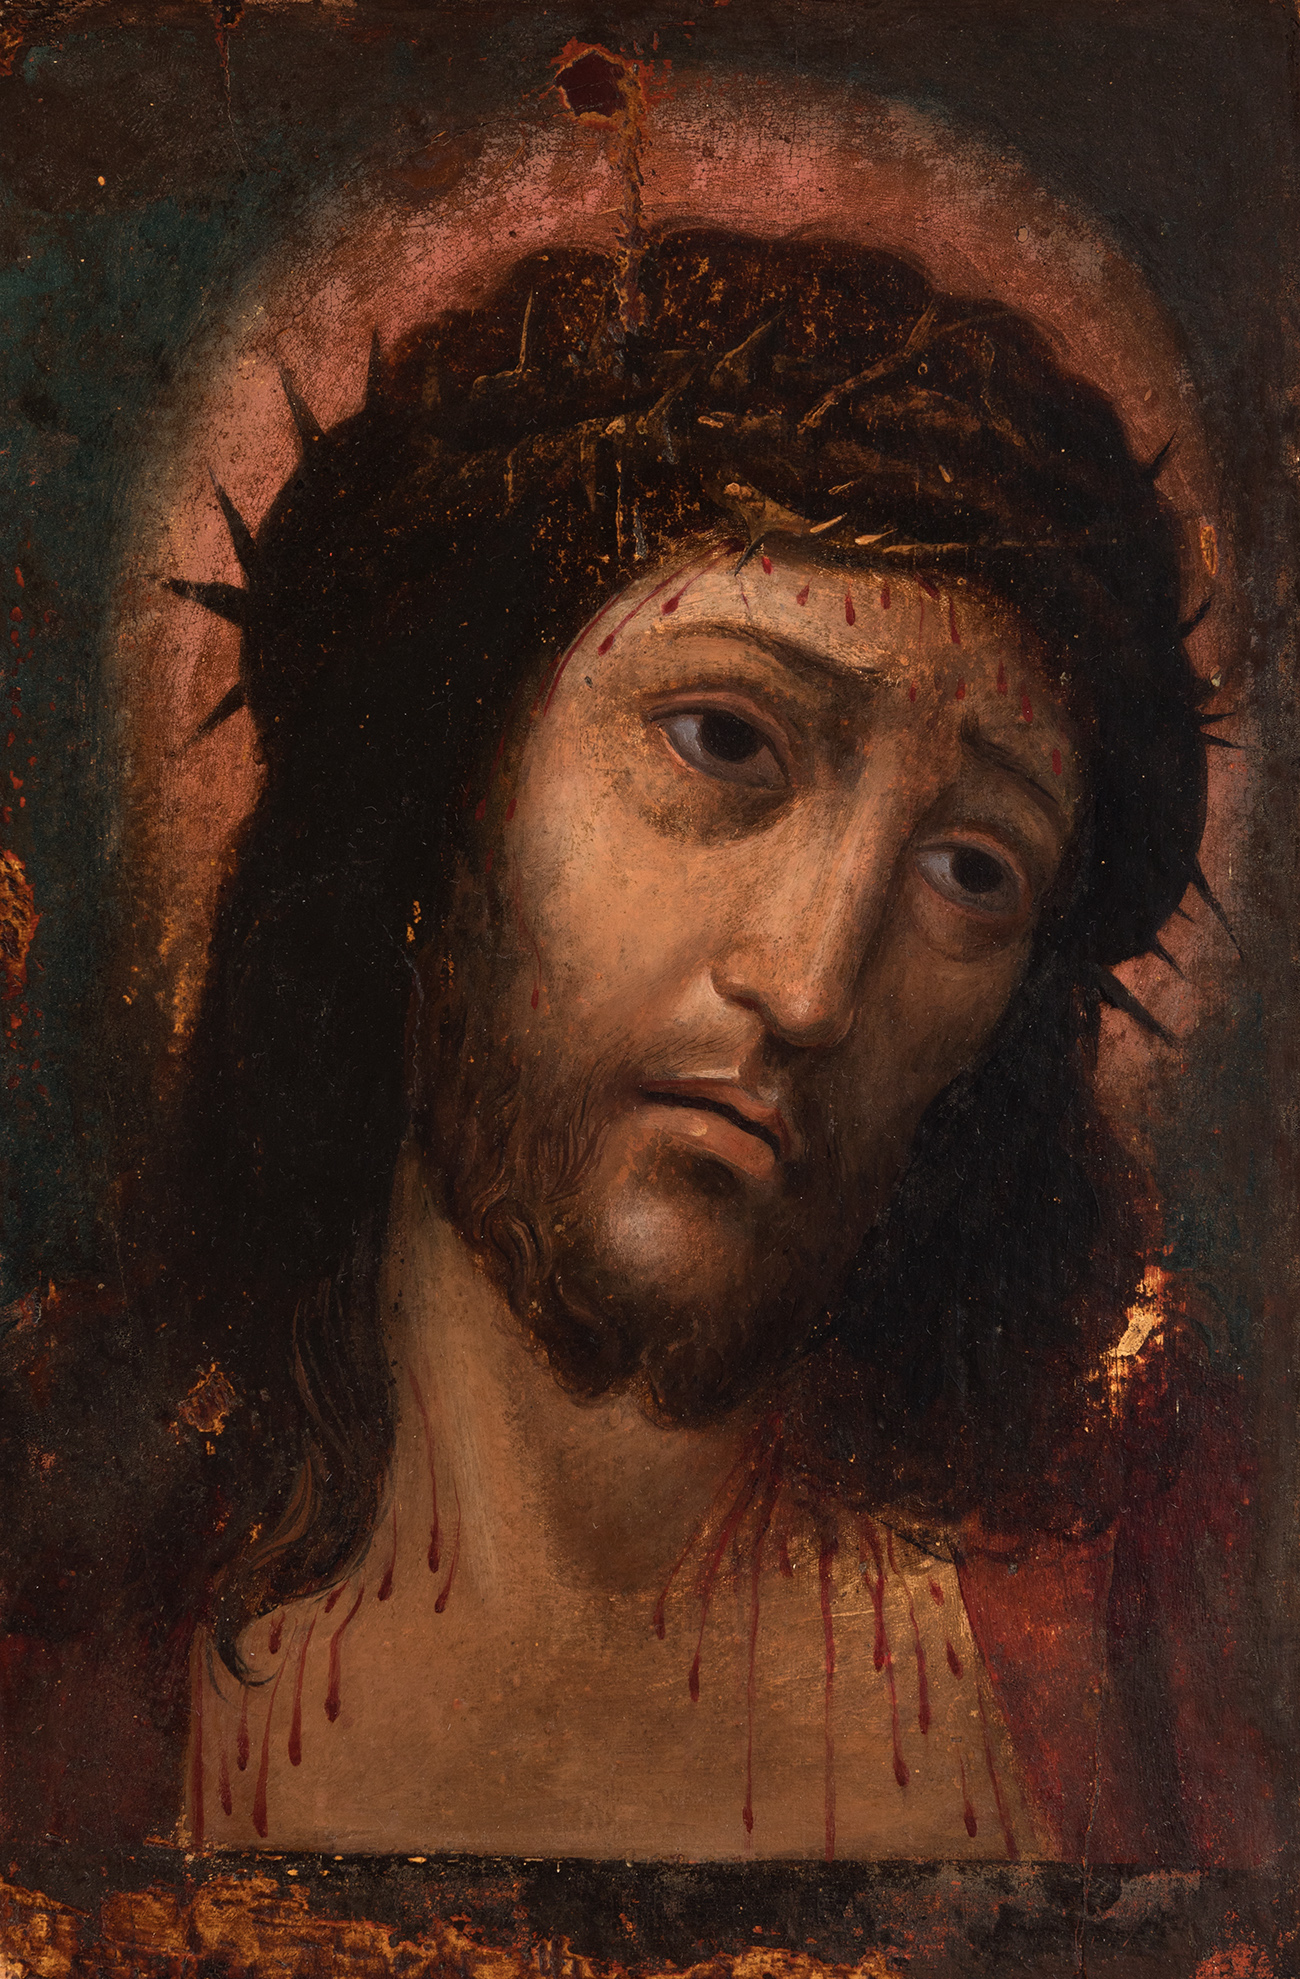 Hispano-Flemish school, 16th century."Christ". After a model by DIRK BOUTS (Haarlem, c. 1410/